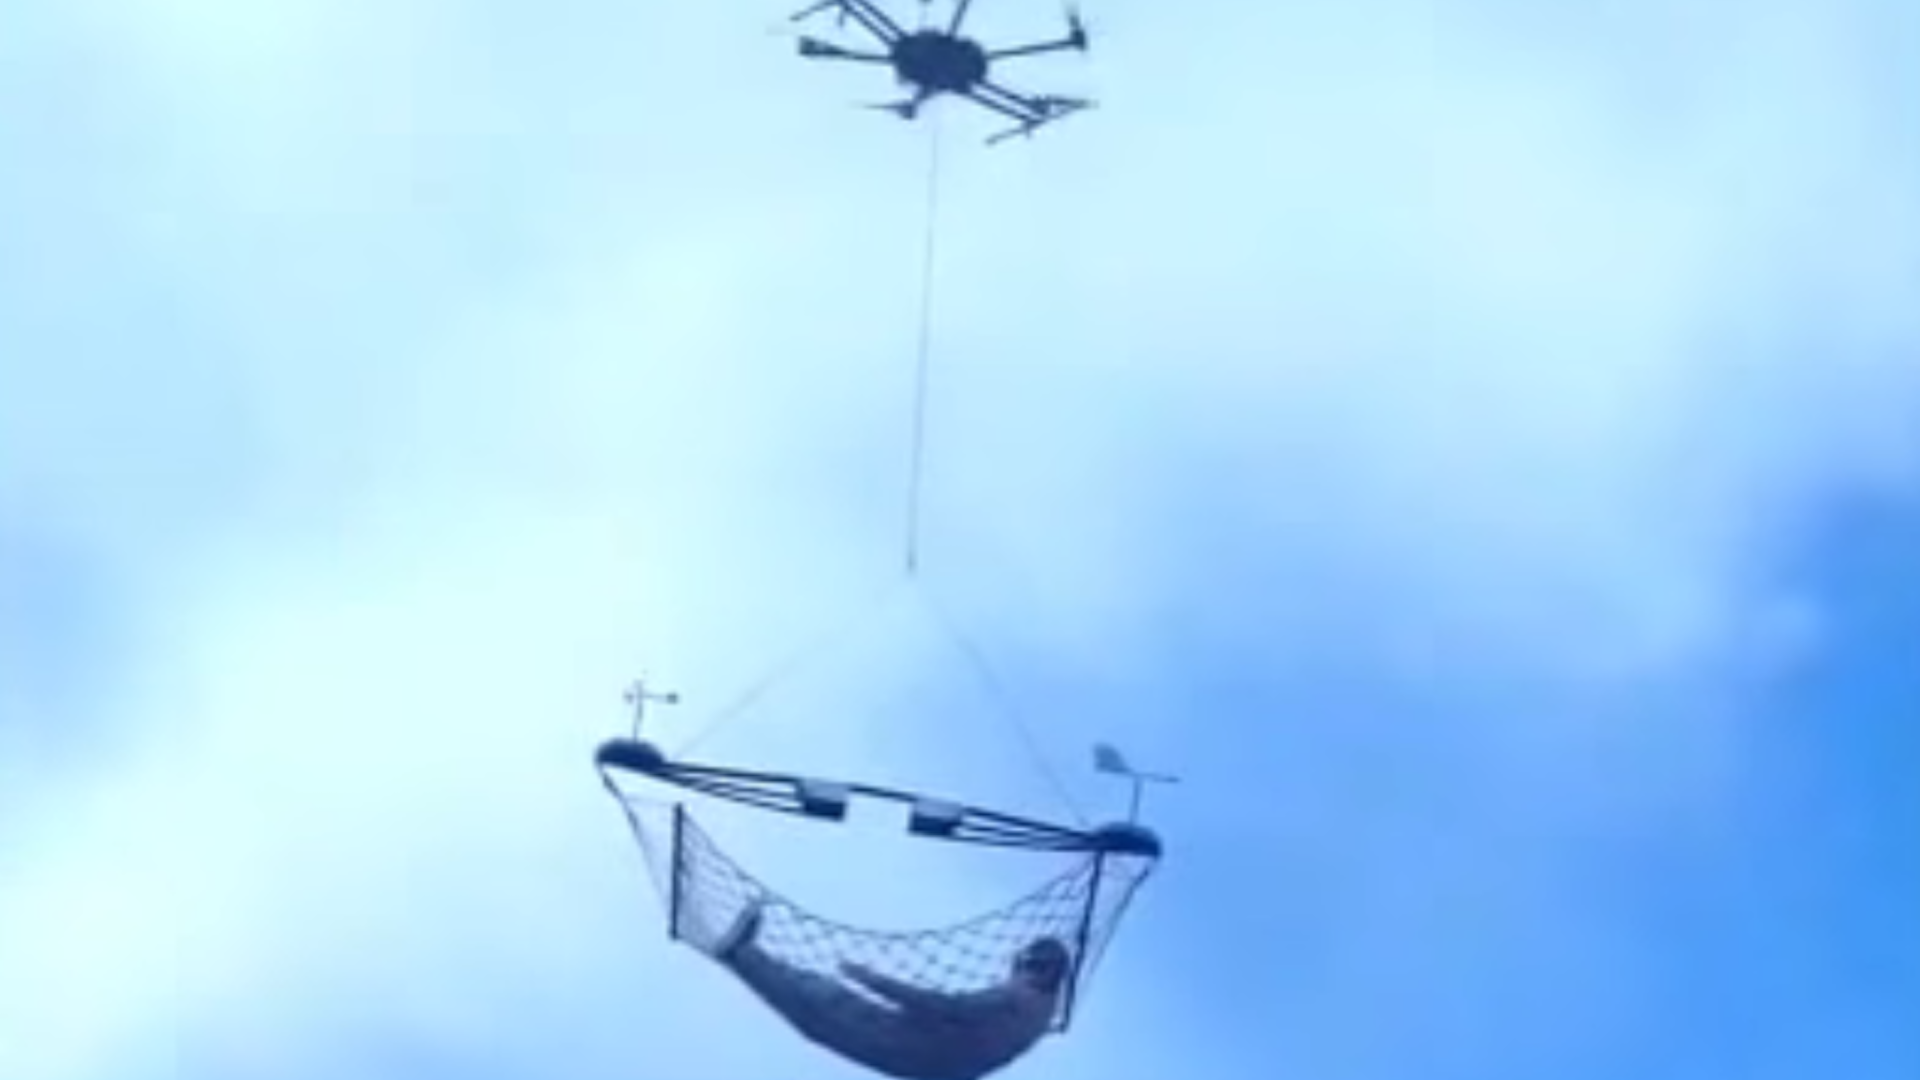 Is This Video of a Drone Carrying a Person in a Hammock Fake?